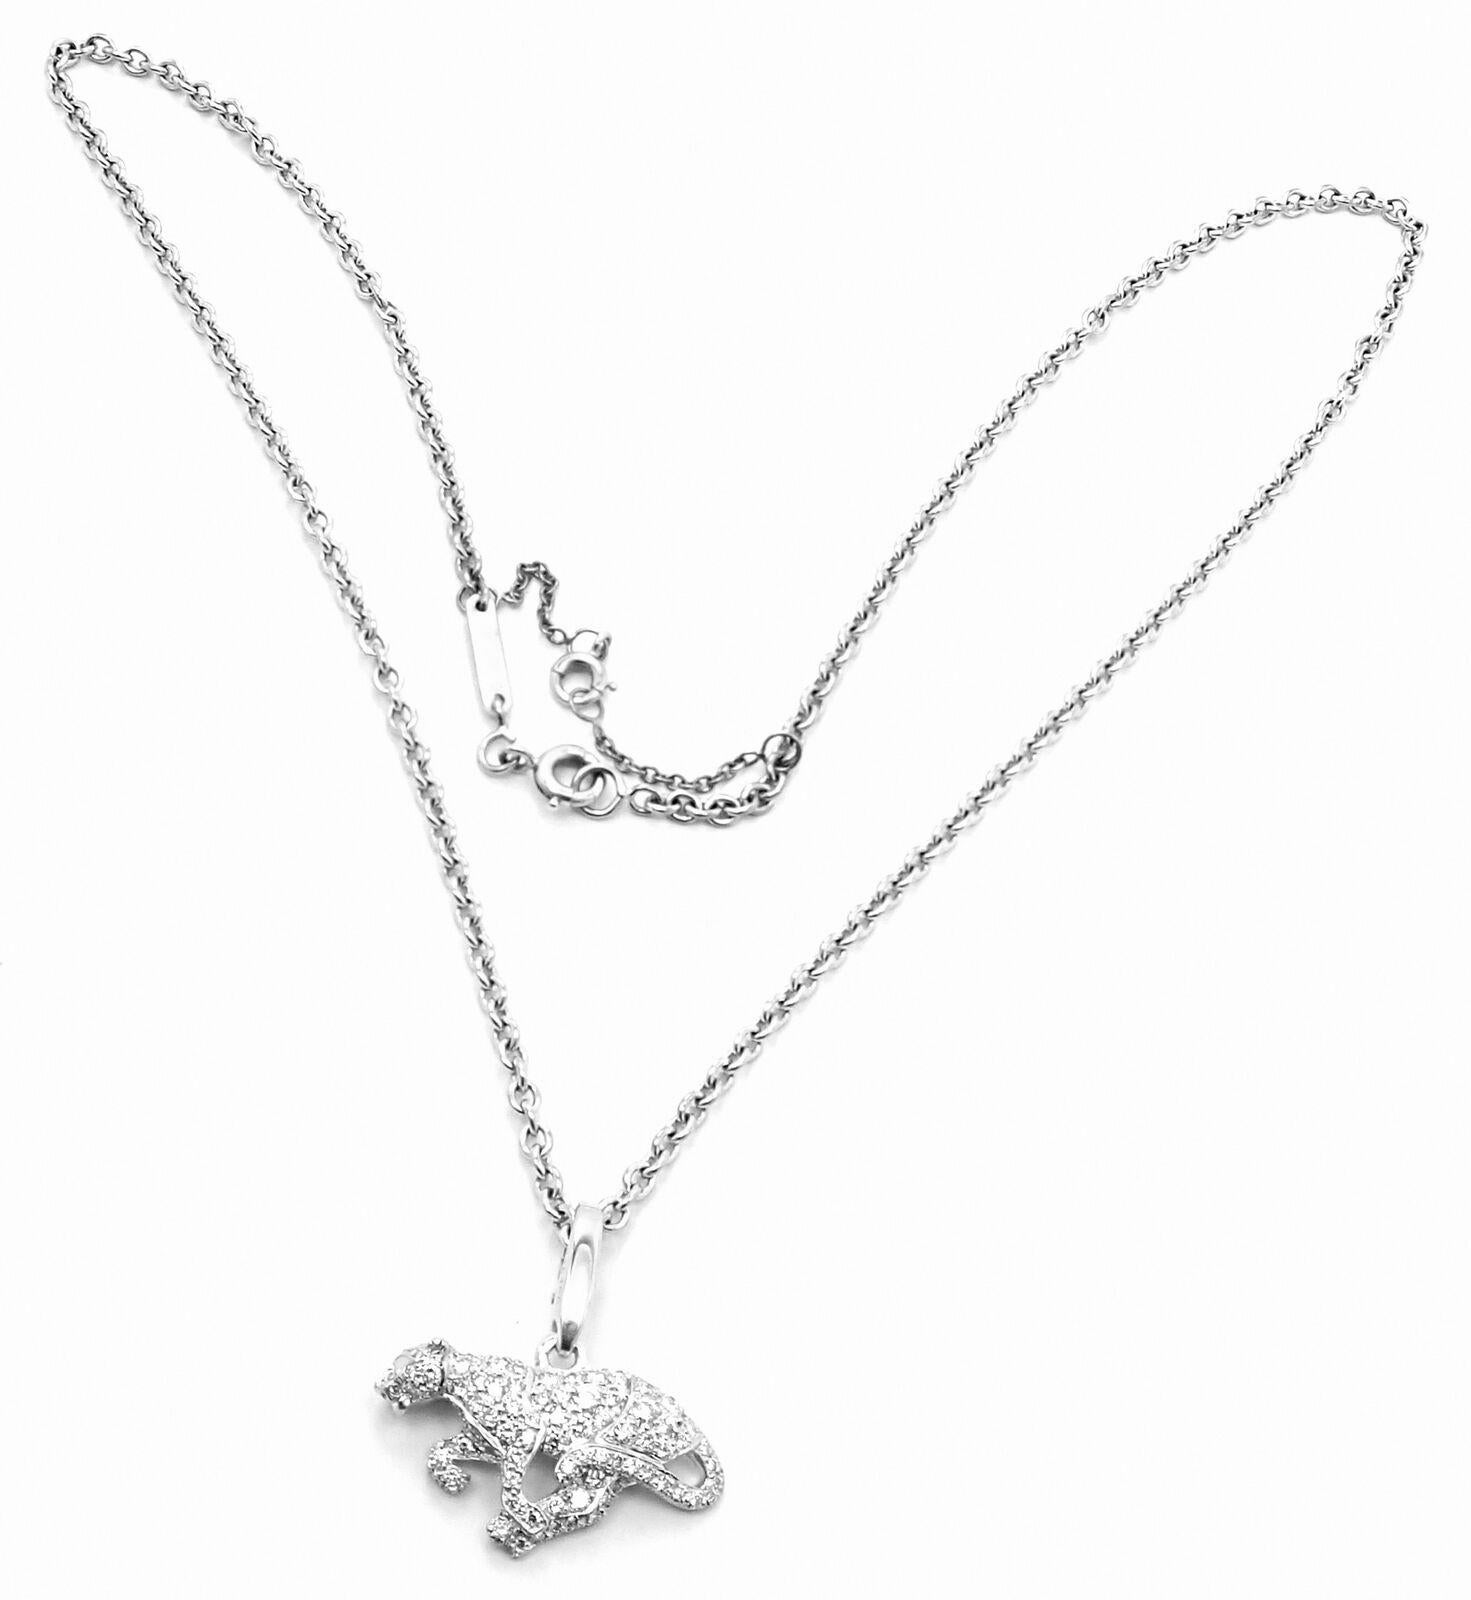 Cartier Panther Panthere Diamond Pendant White Gold Necklace 5